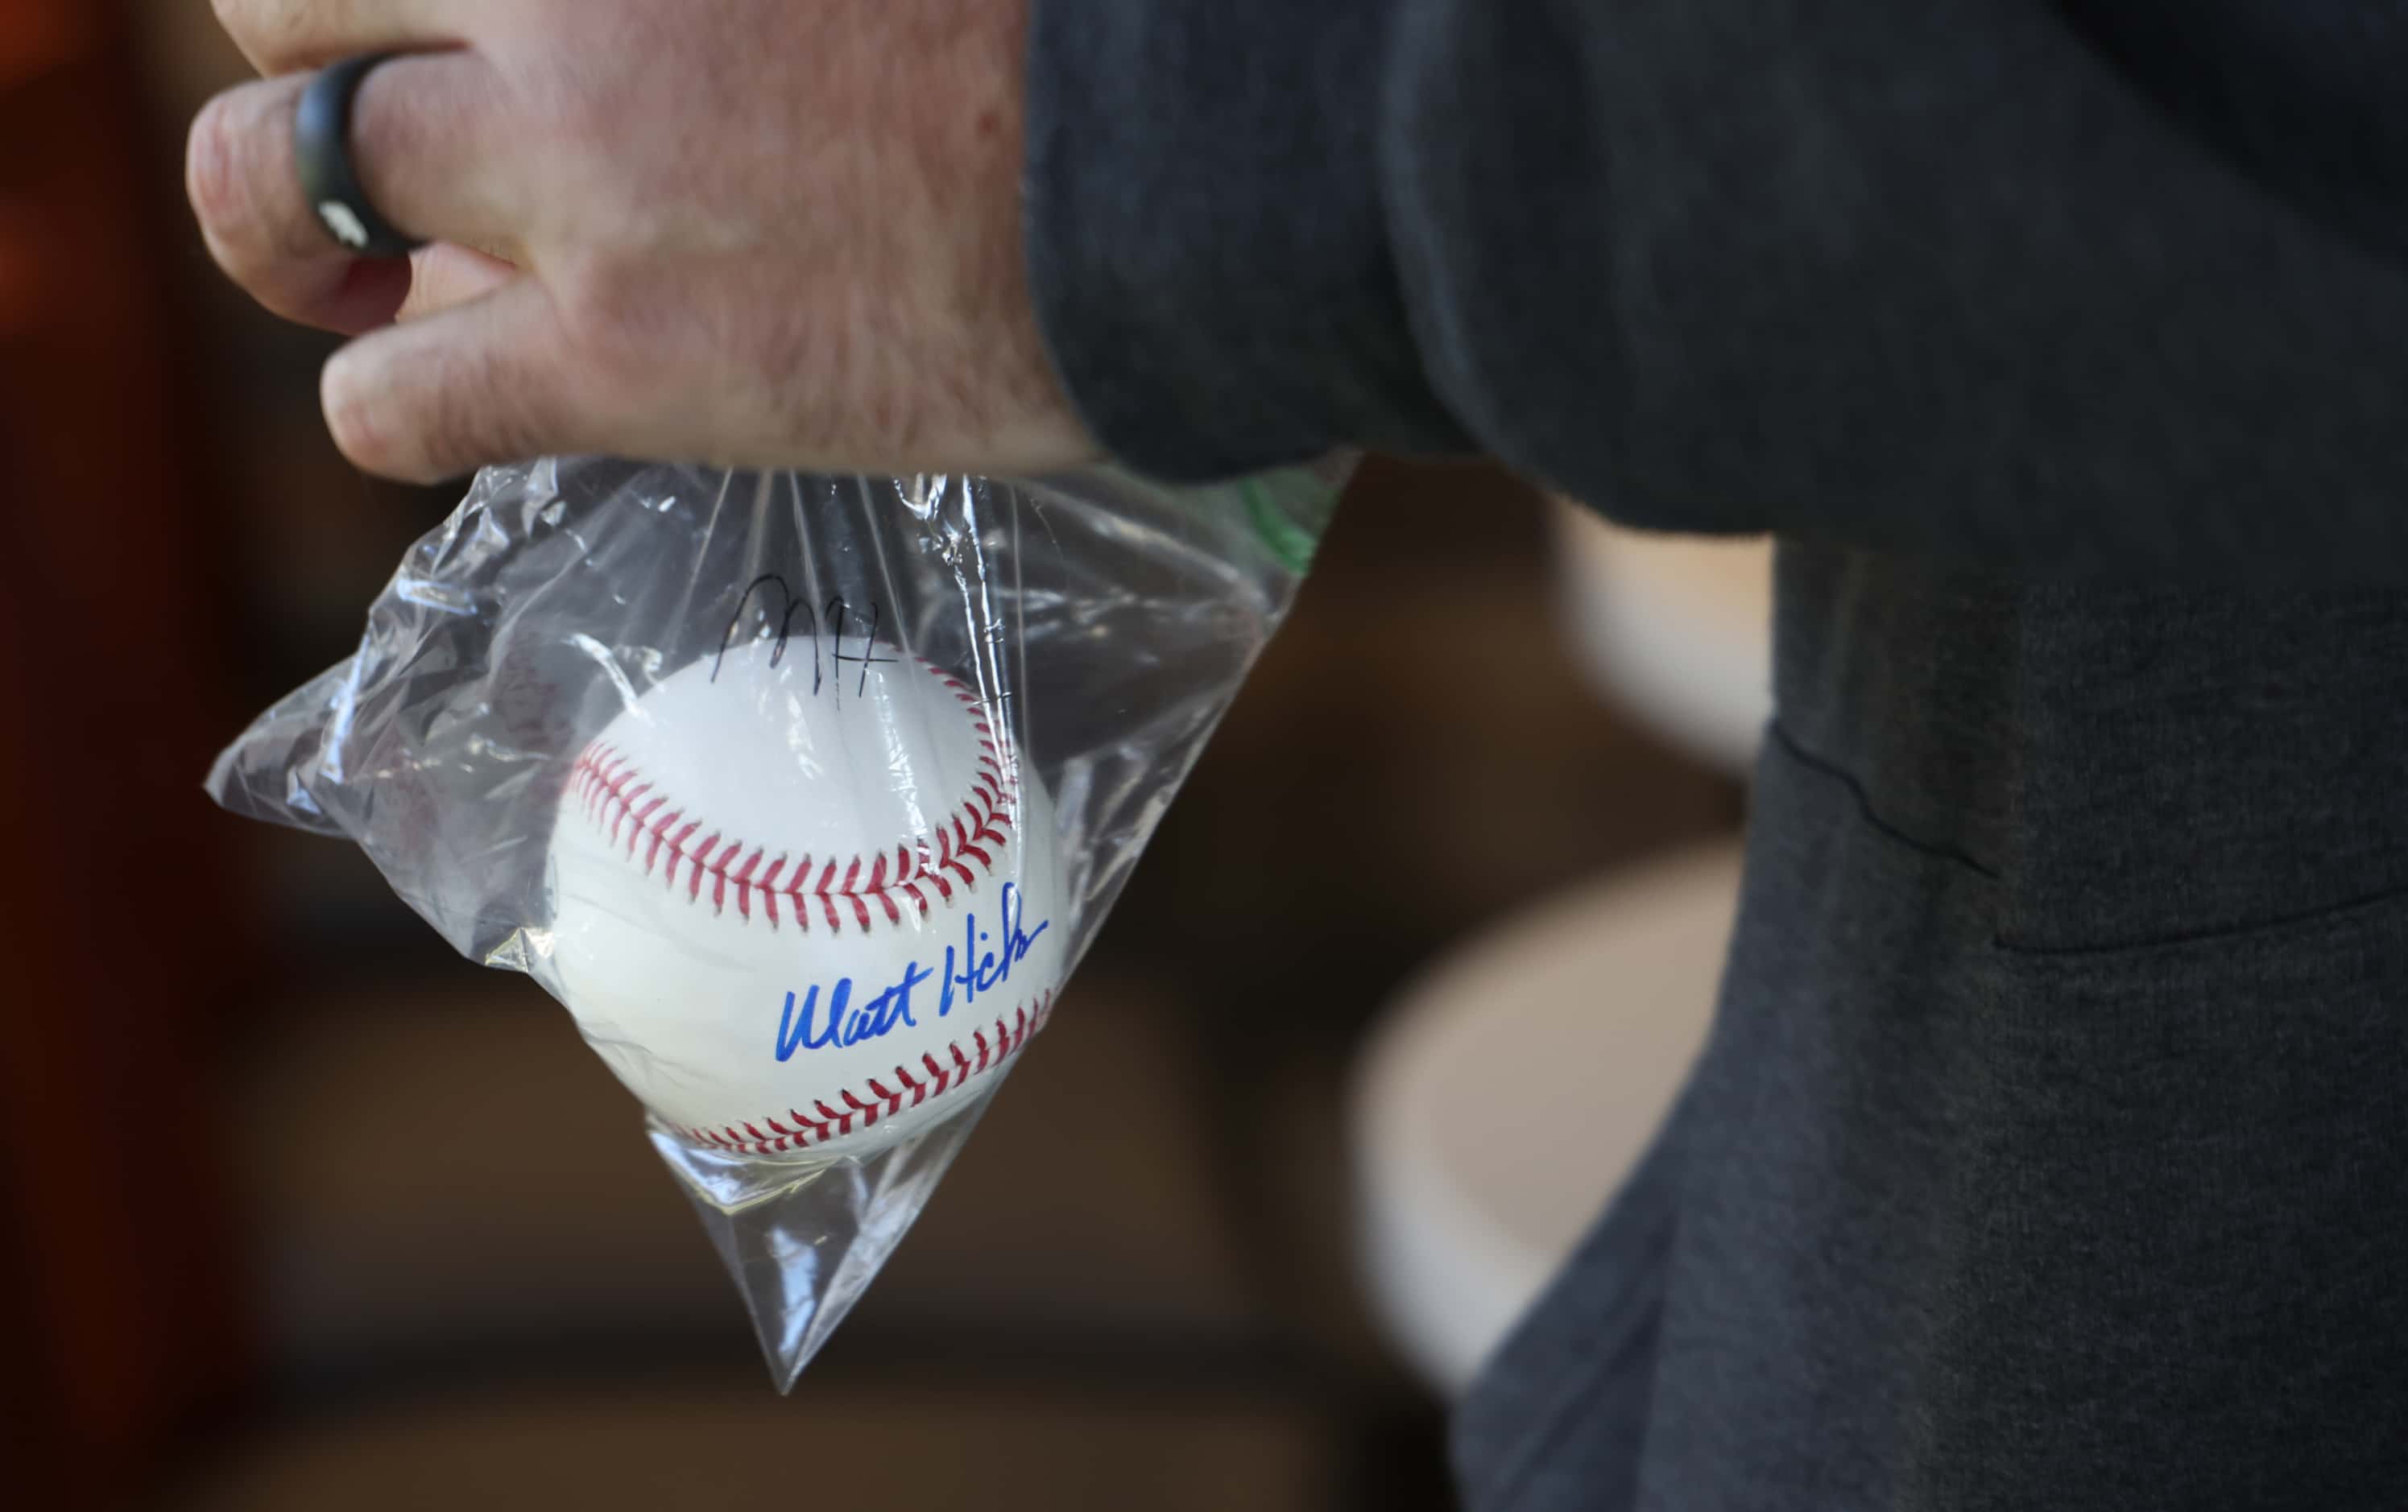 A Texas Rangers fan secures an autographed ball after signed by Rangers radio broadcaster...